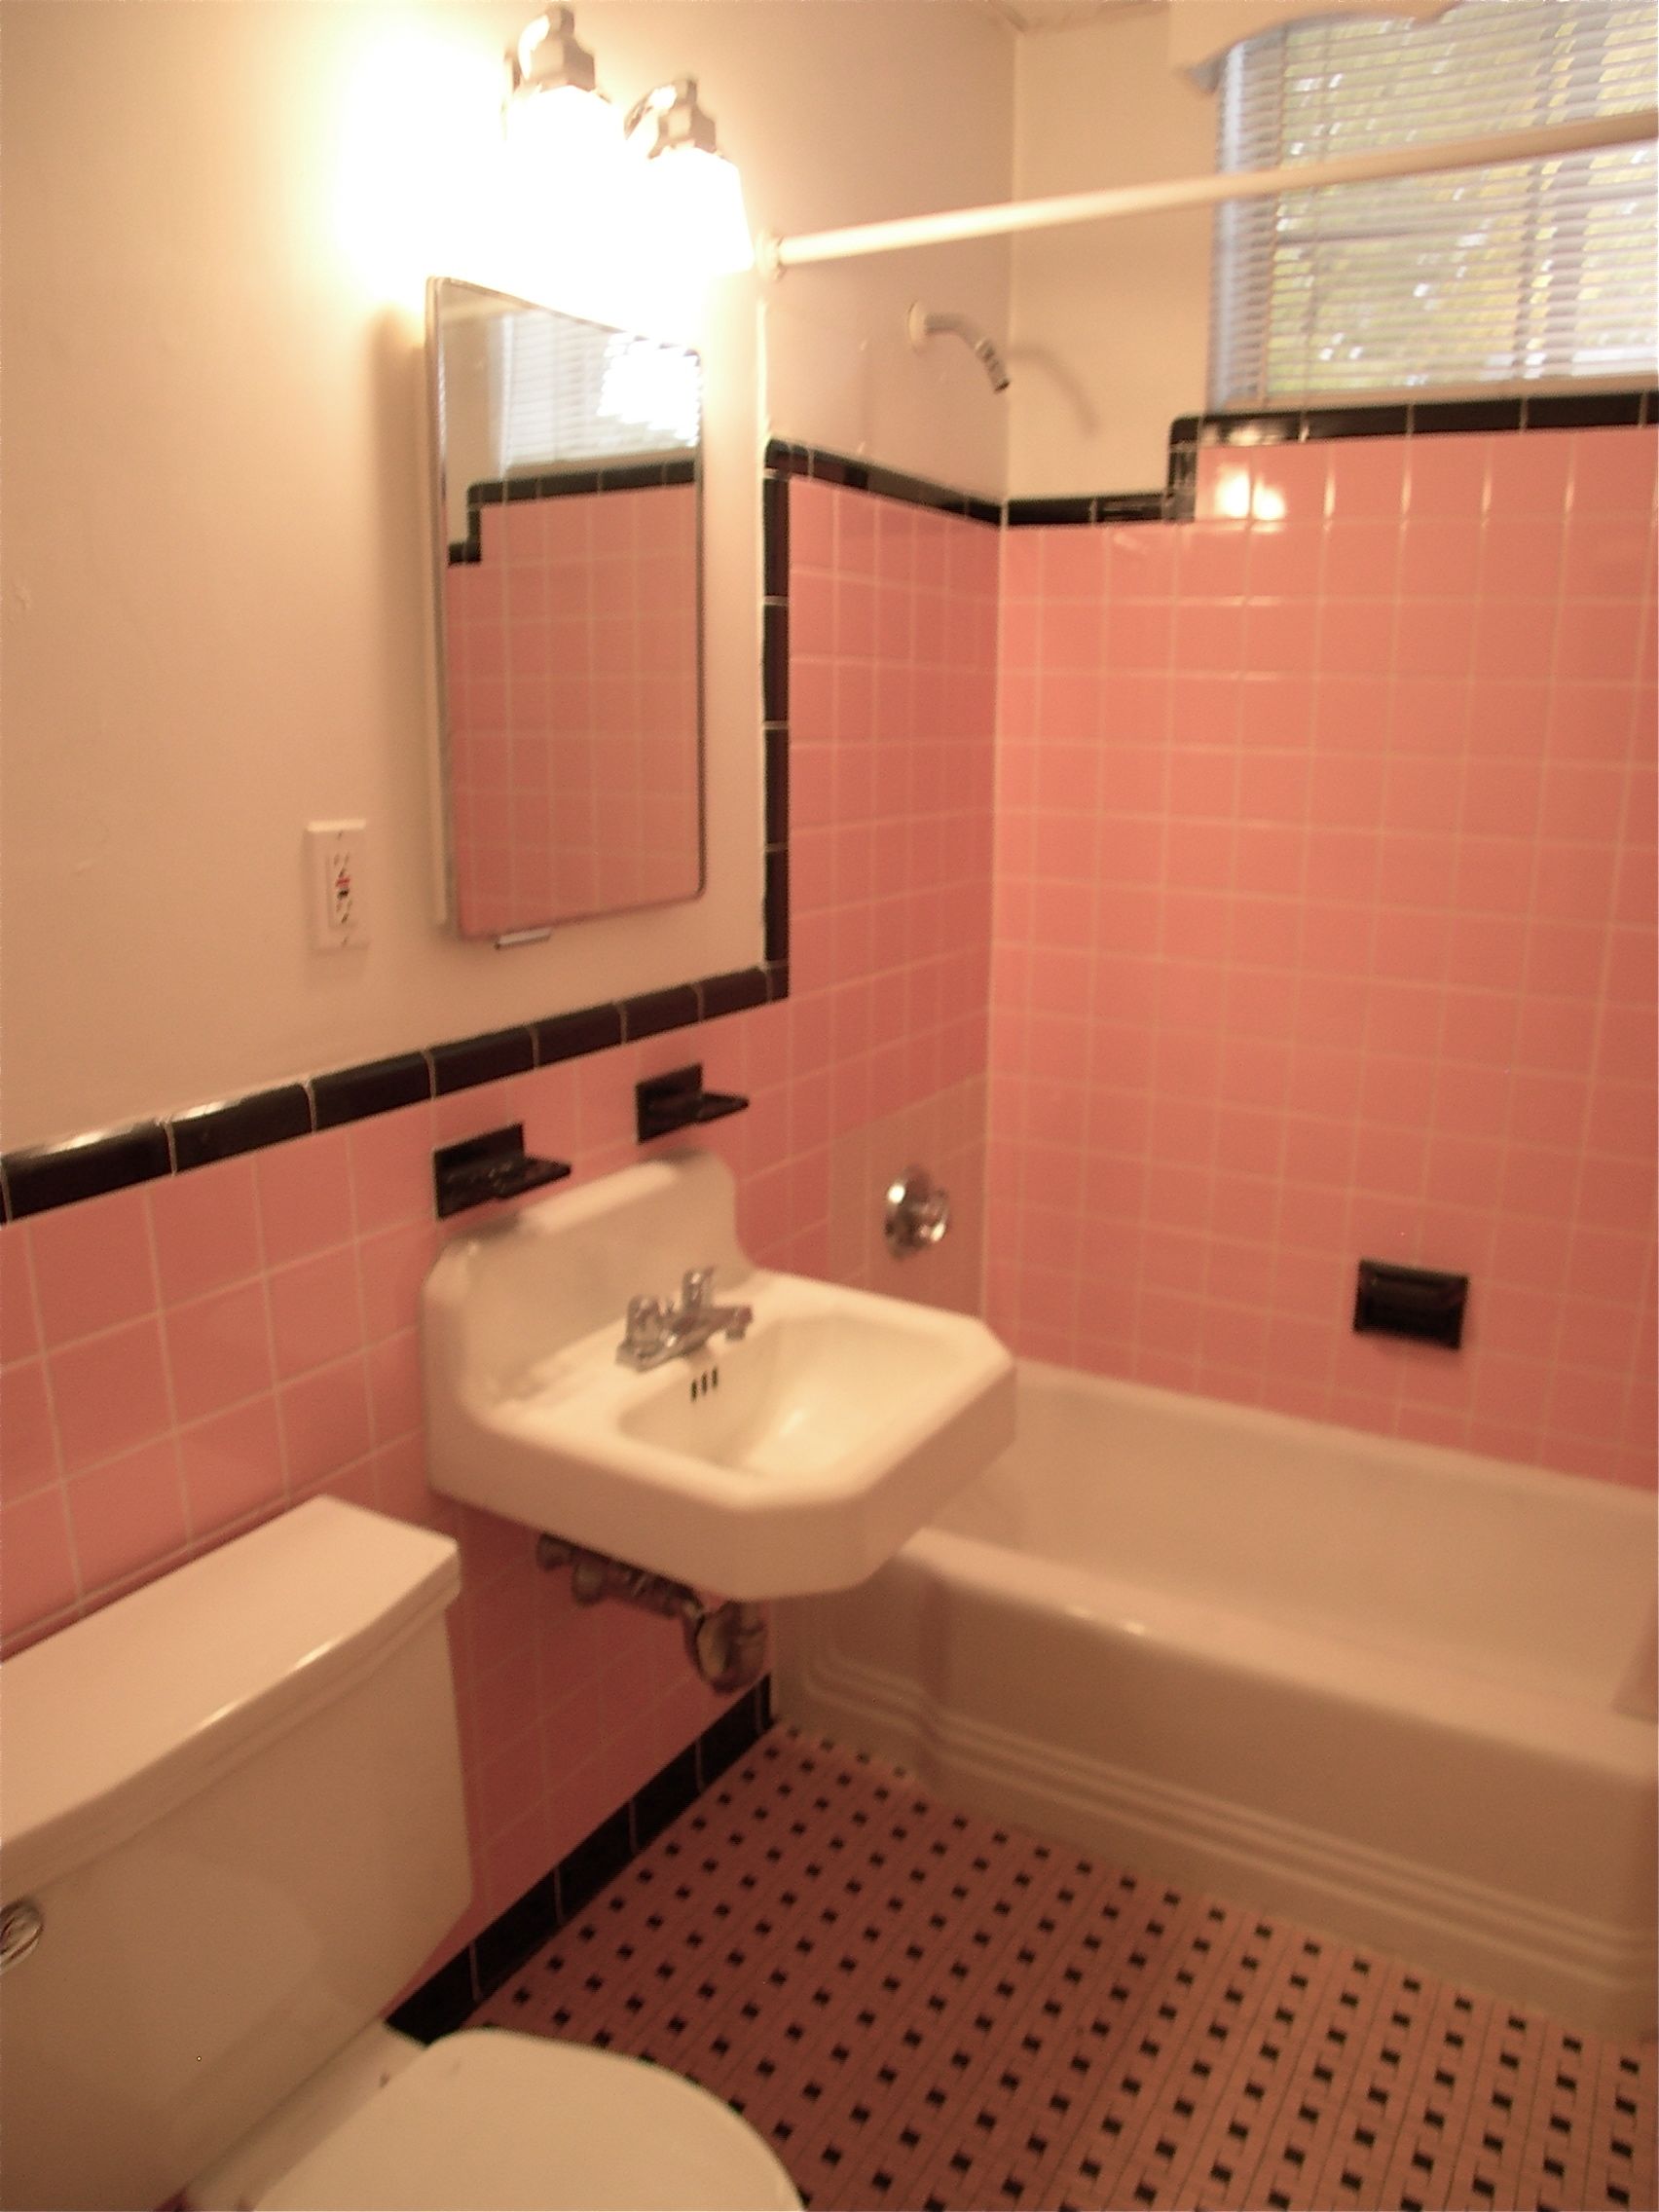 Happy New Year and the Pink Tile Bathroom is Back